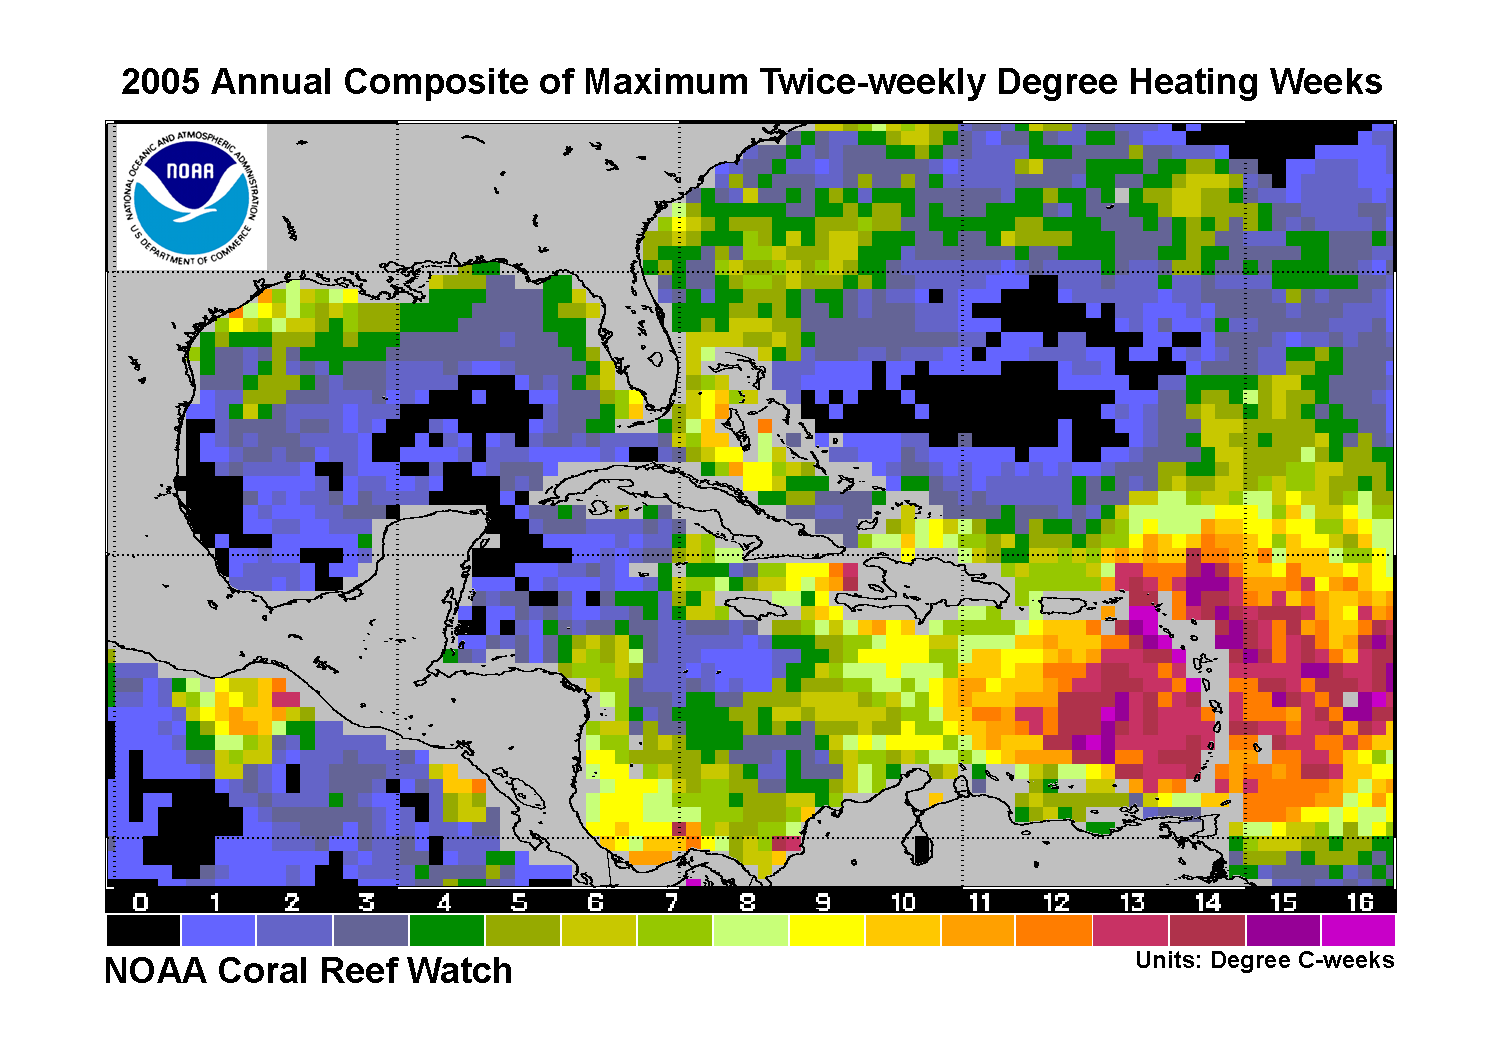 Satellite data displaying the coral bleaching event in 2005 caused by increased temperatures (Image courtesy of the NOAA).